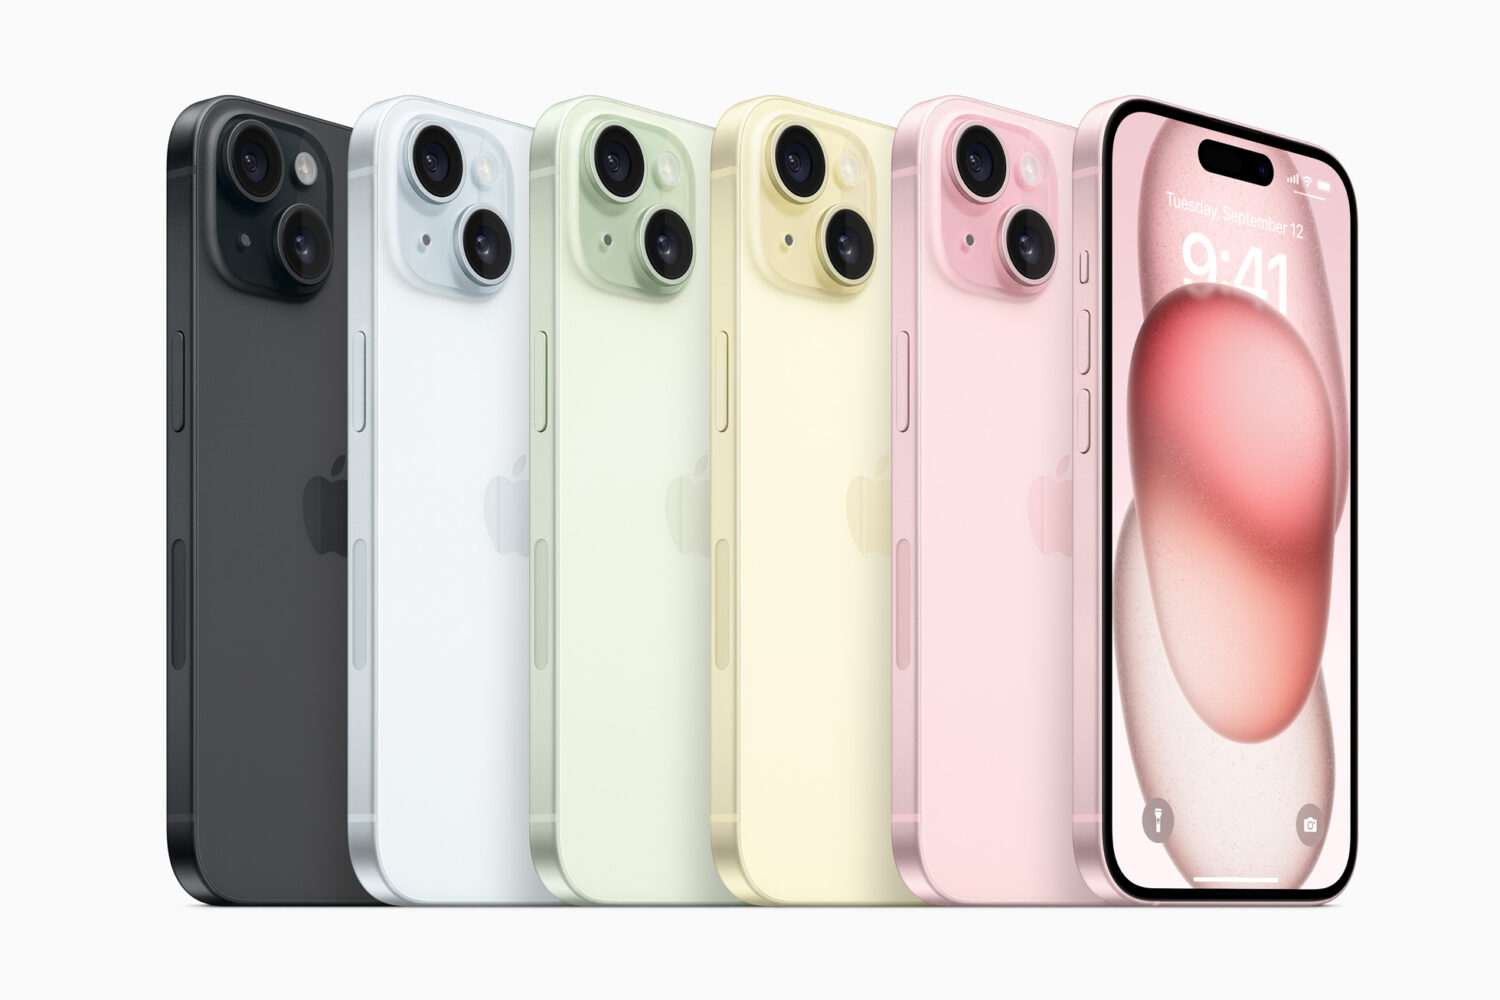 iPhone 15 and iPhone 15 Plus models in black, blue, green, yellow and pink